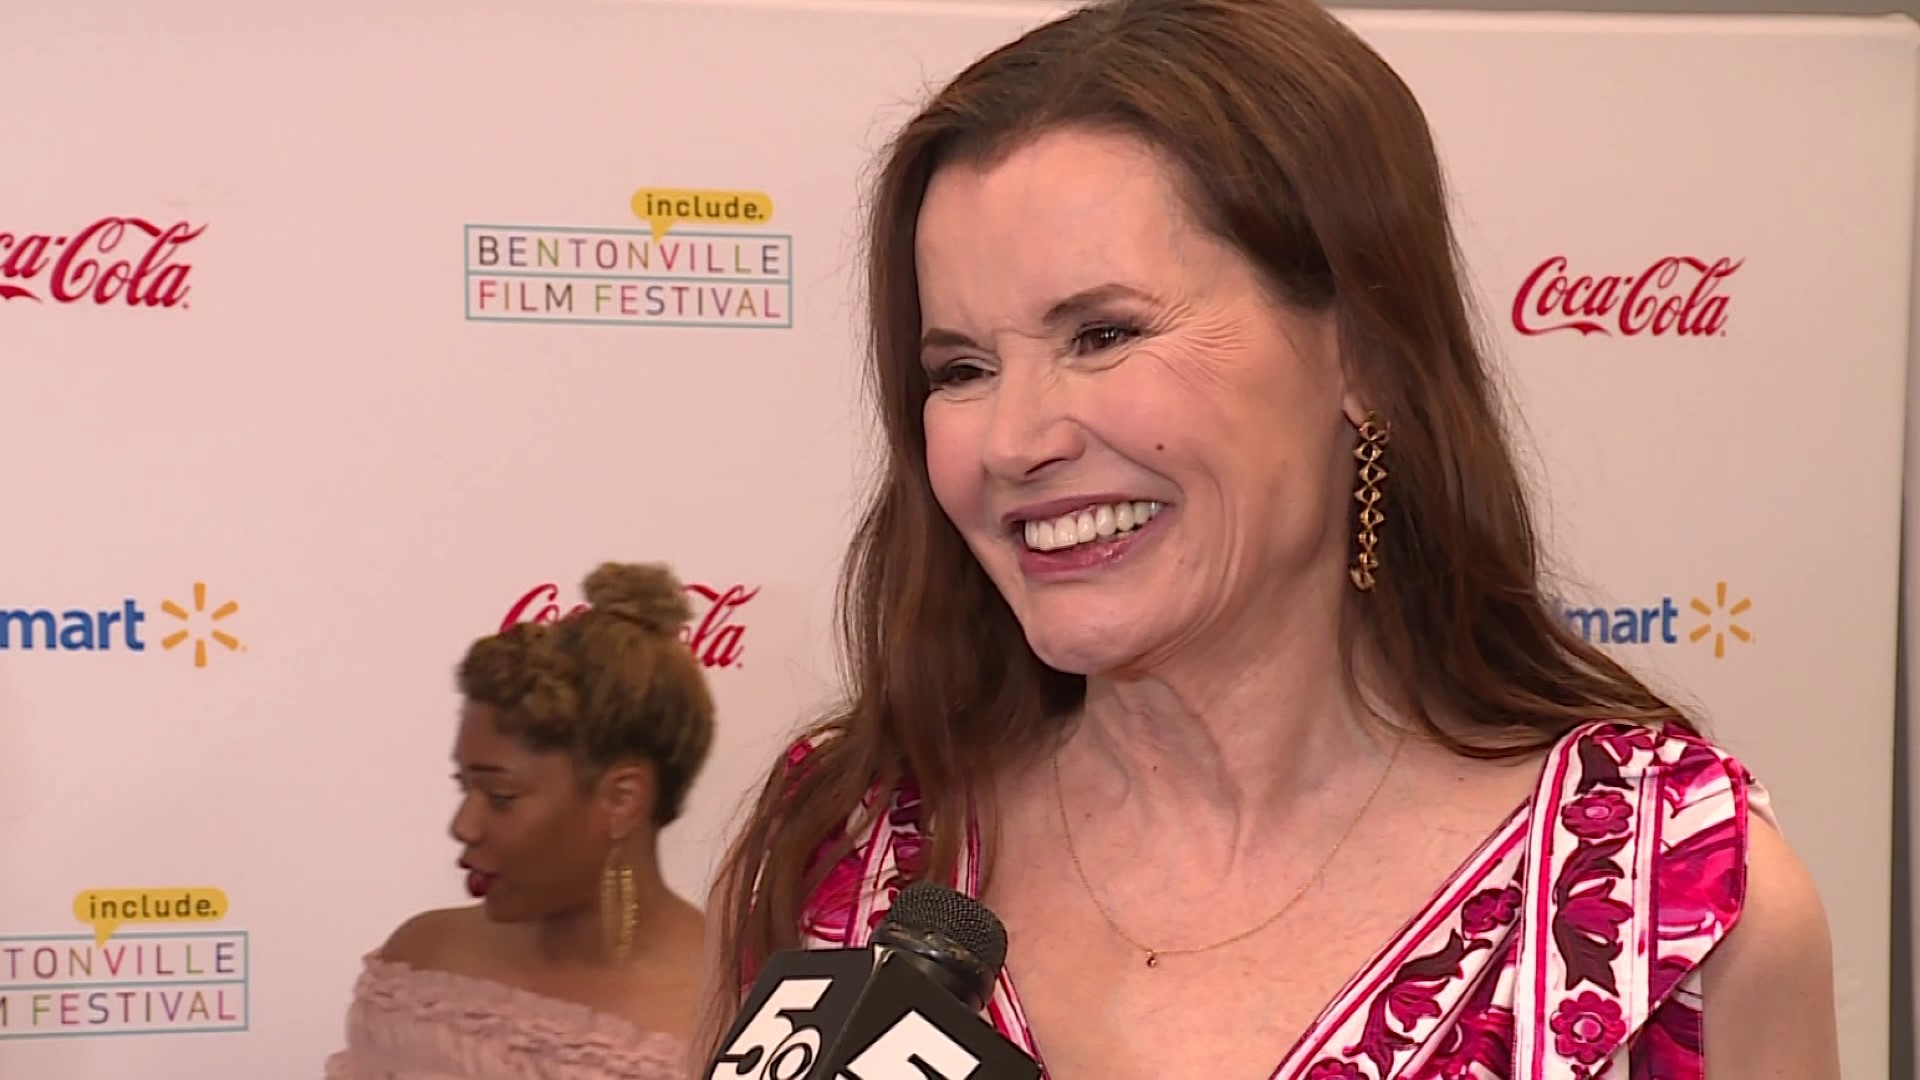 Movie and TV stars Geena Davis and Ken Jeong arrived at the Bentonville Film Festival and spoke about inclusivity on both sides of the camera.